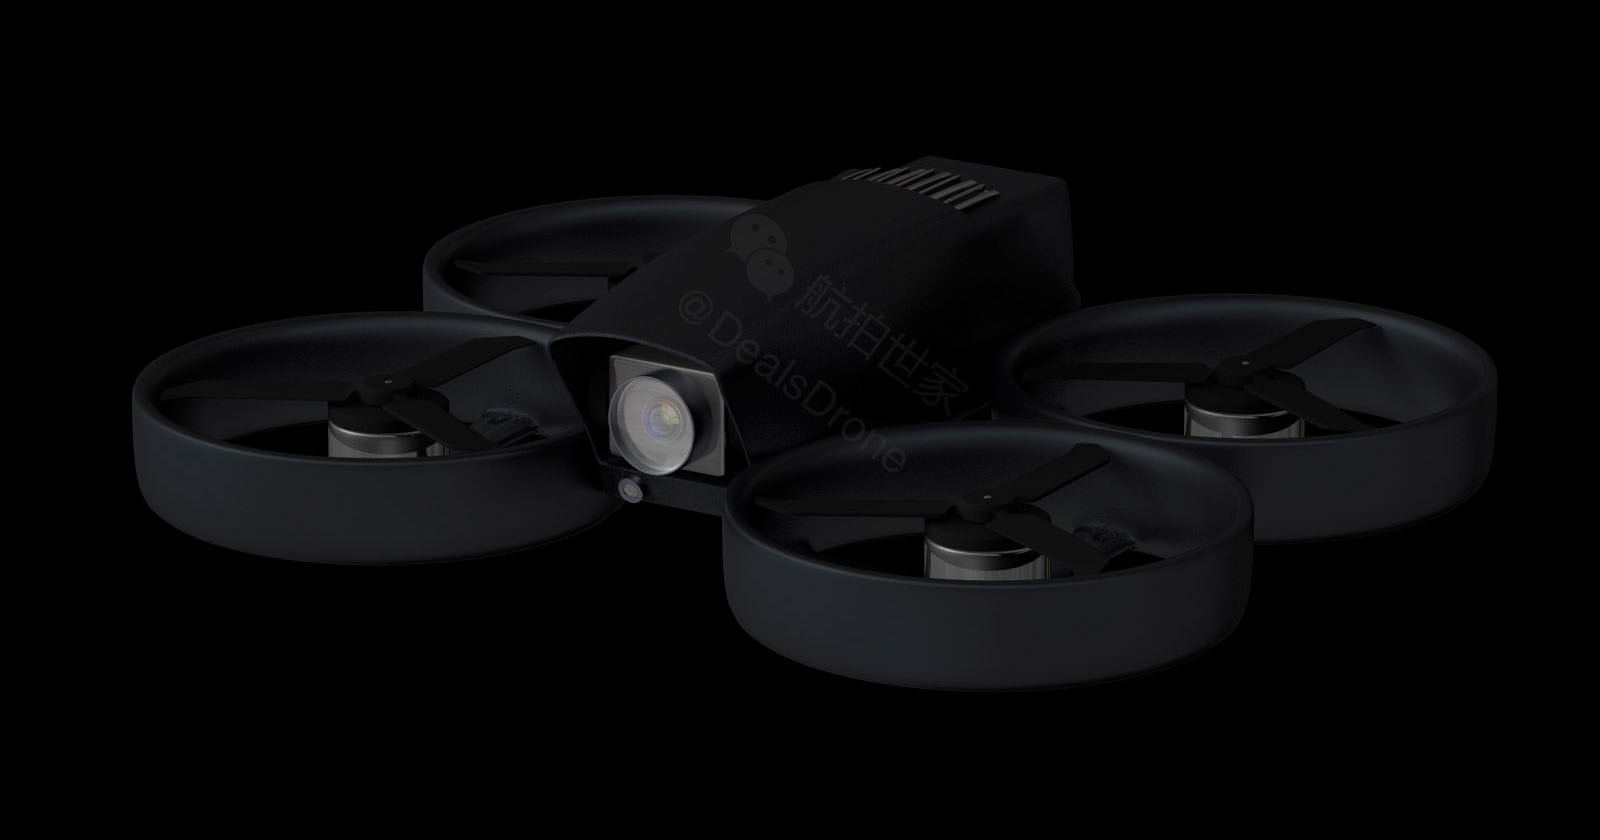 Leaked Images Allege DJI is Working on a Compact Racing-Style Drone